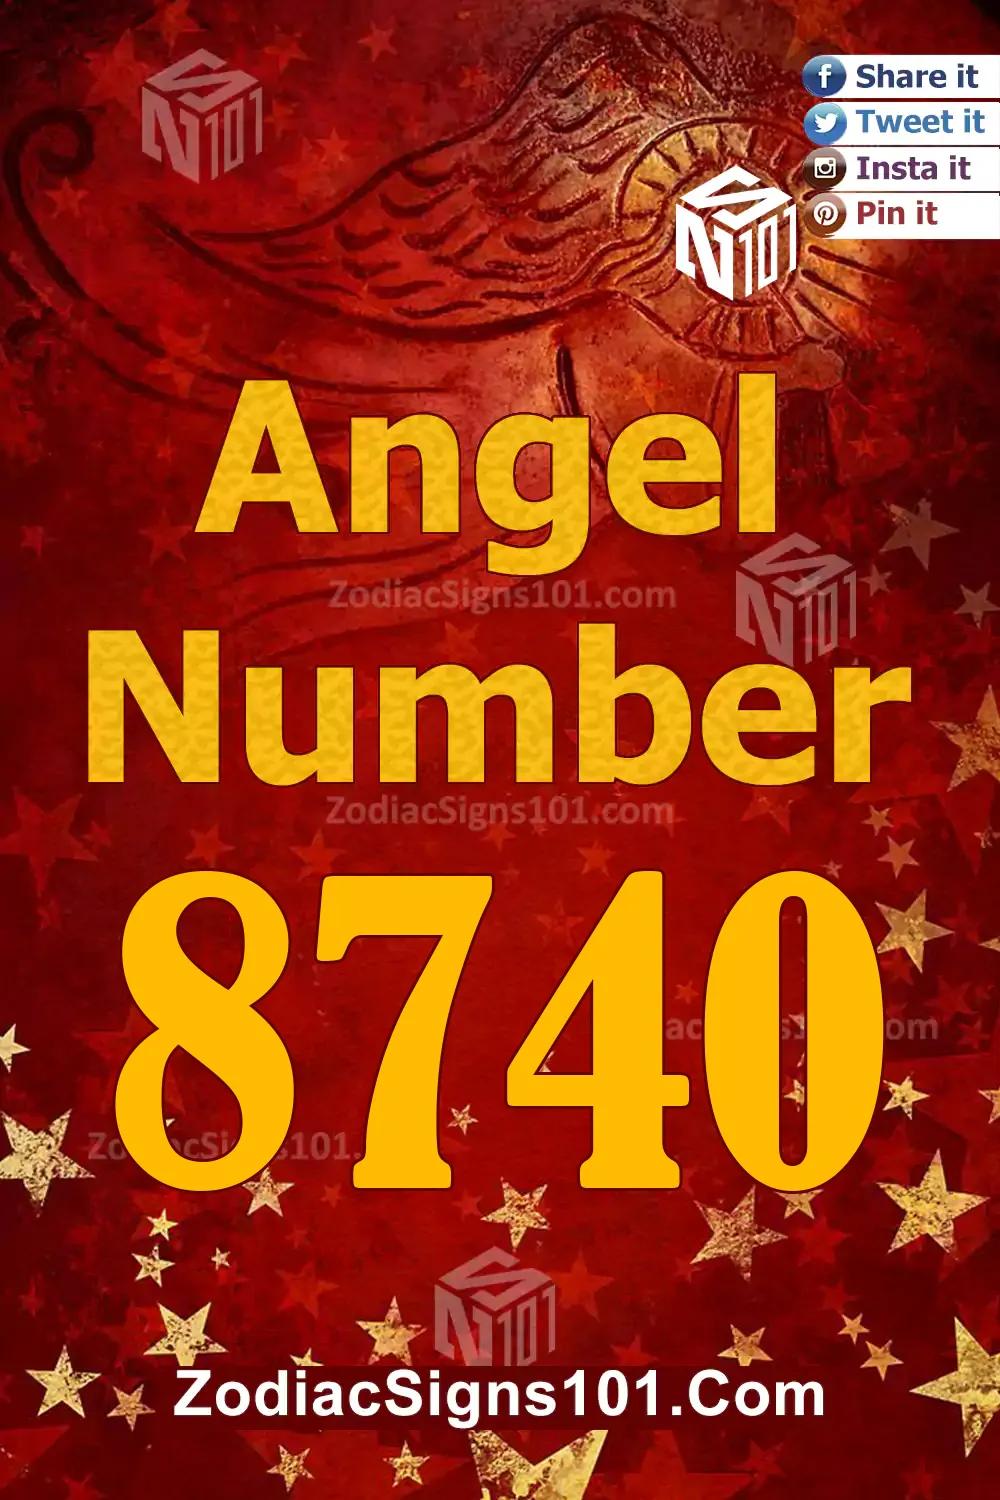 8740 Angel Number Meaning